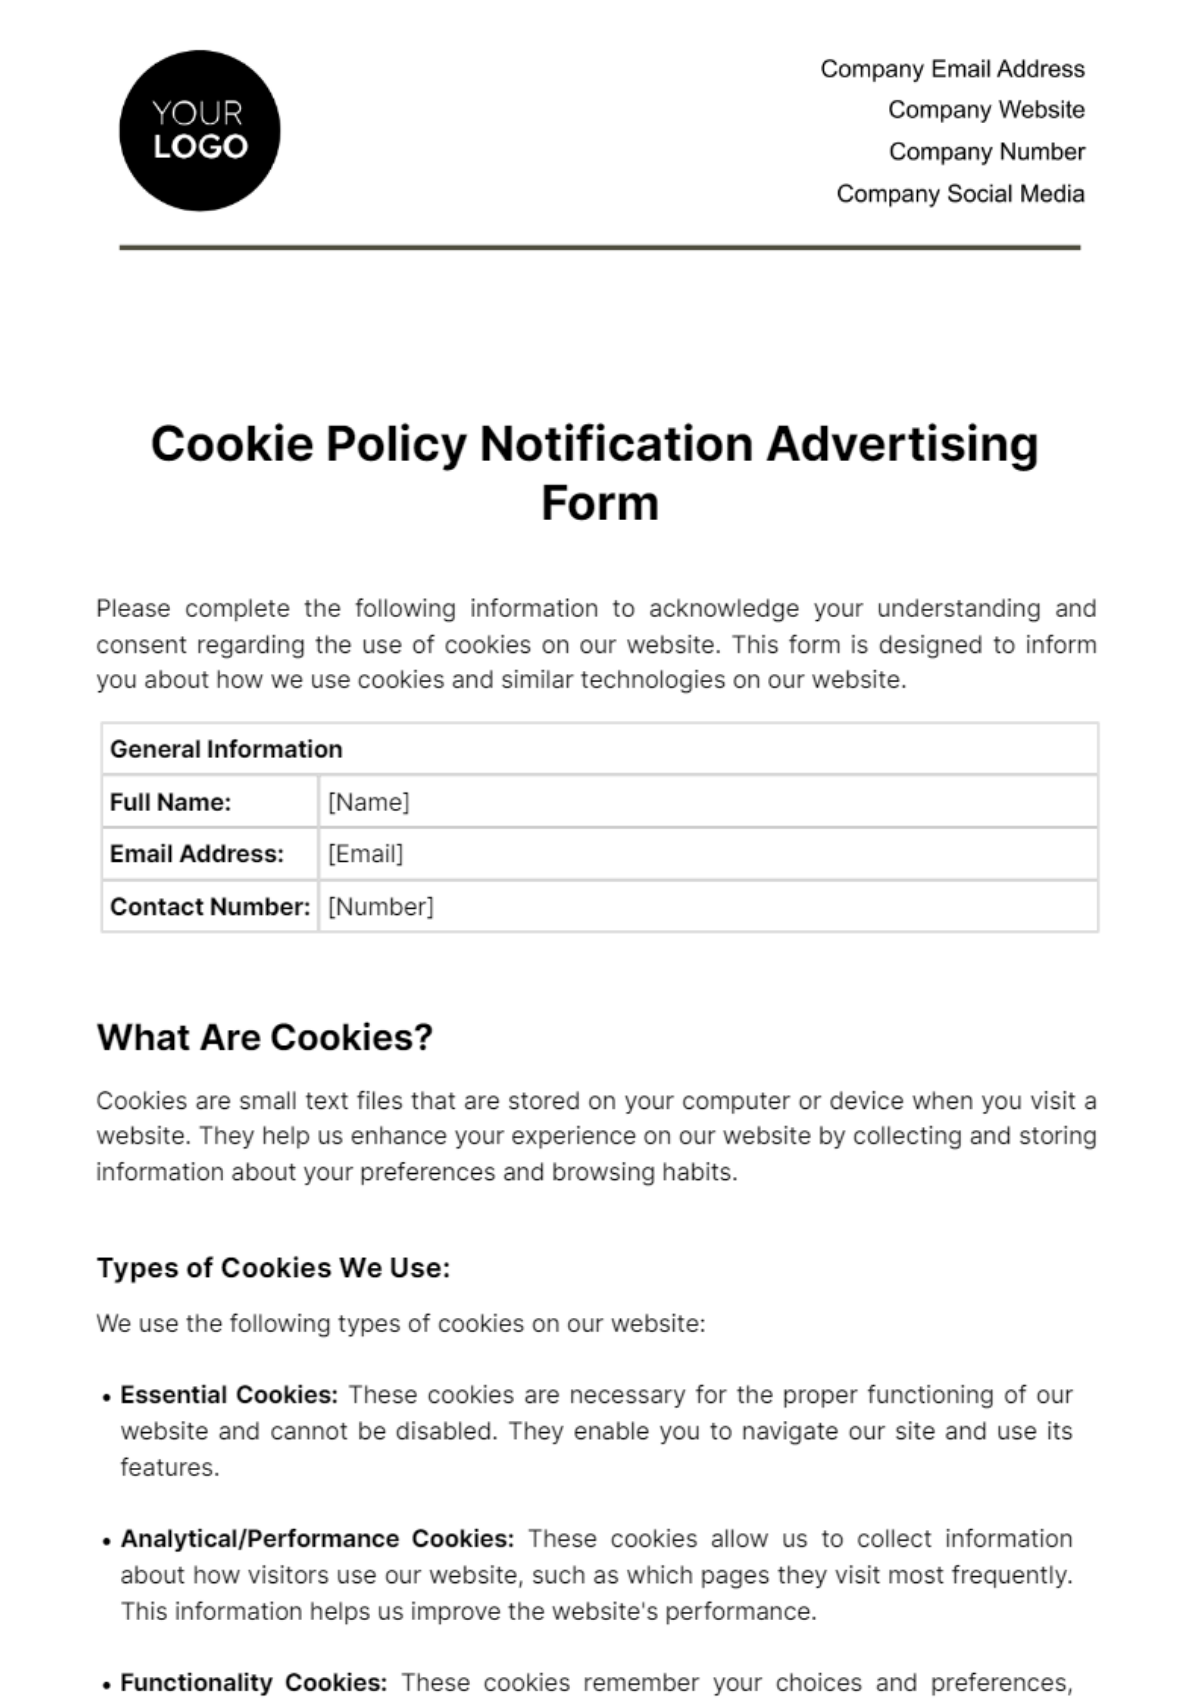 Cookie Policy Notification Advertising Form Template